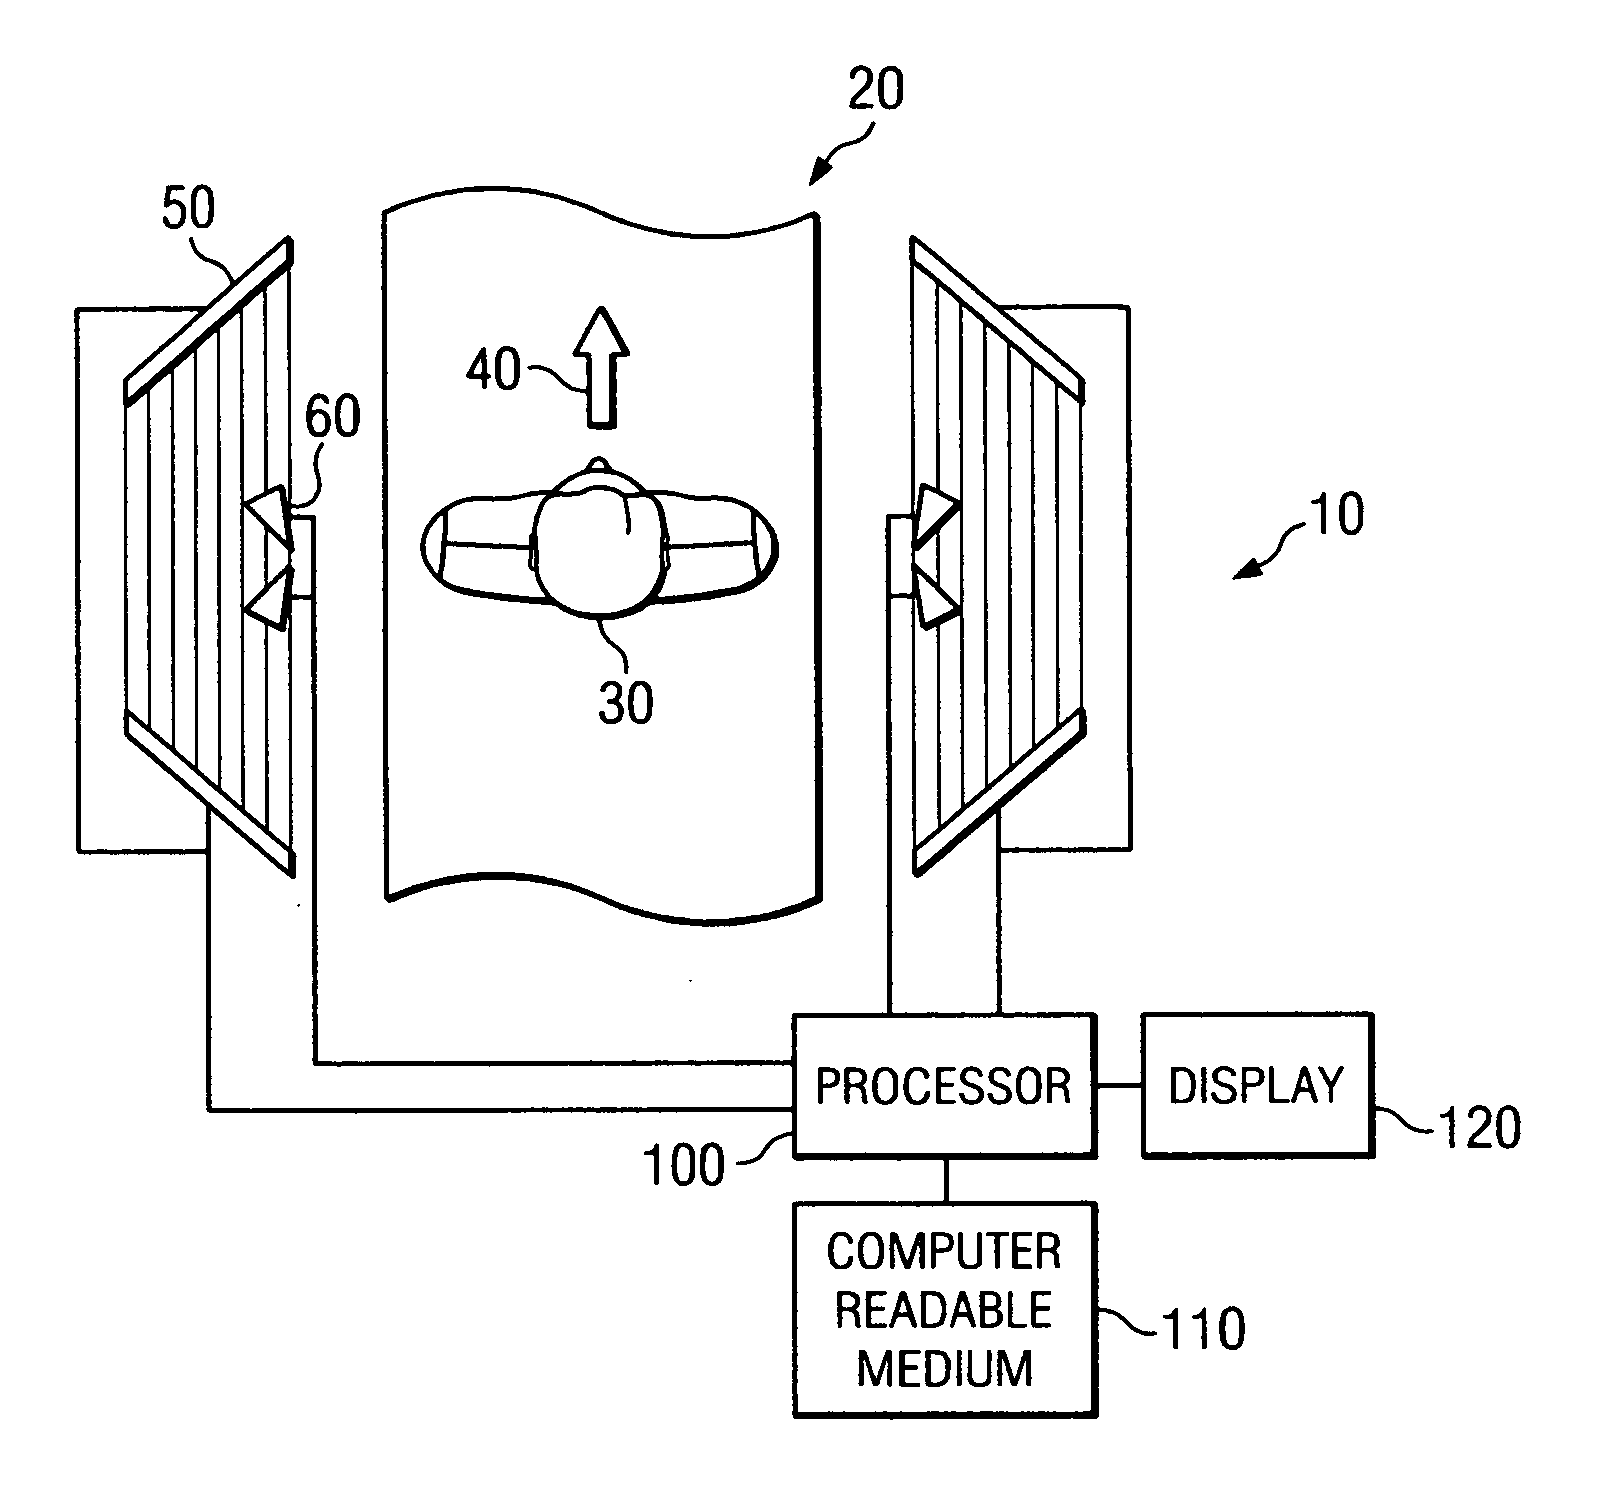 System and method for security inspection using microwave imaging